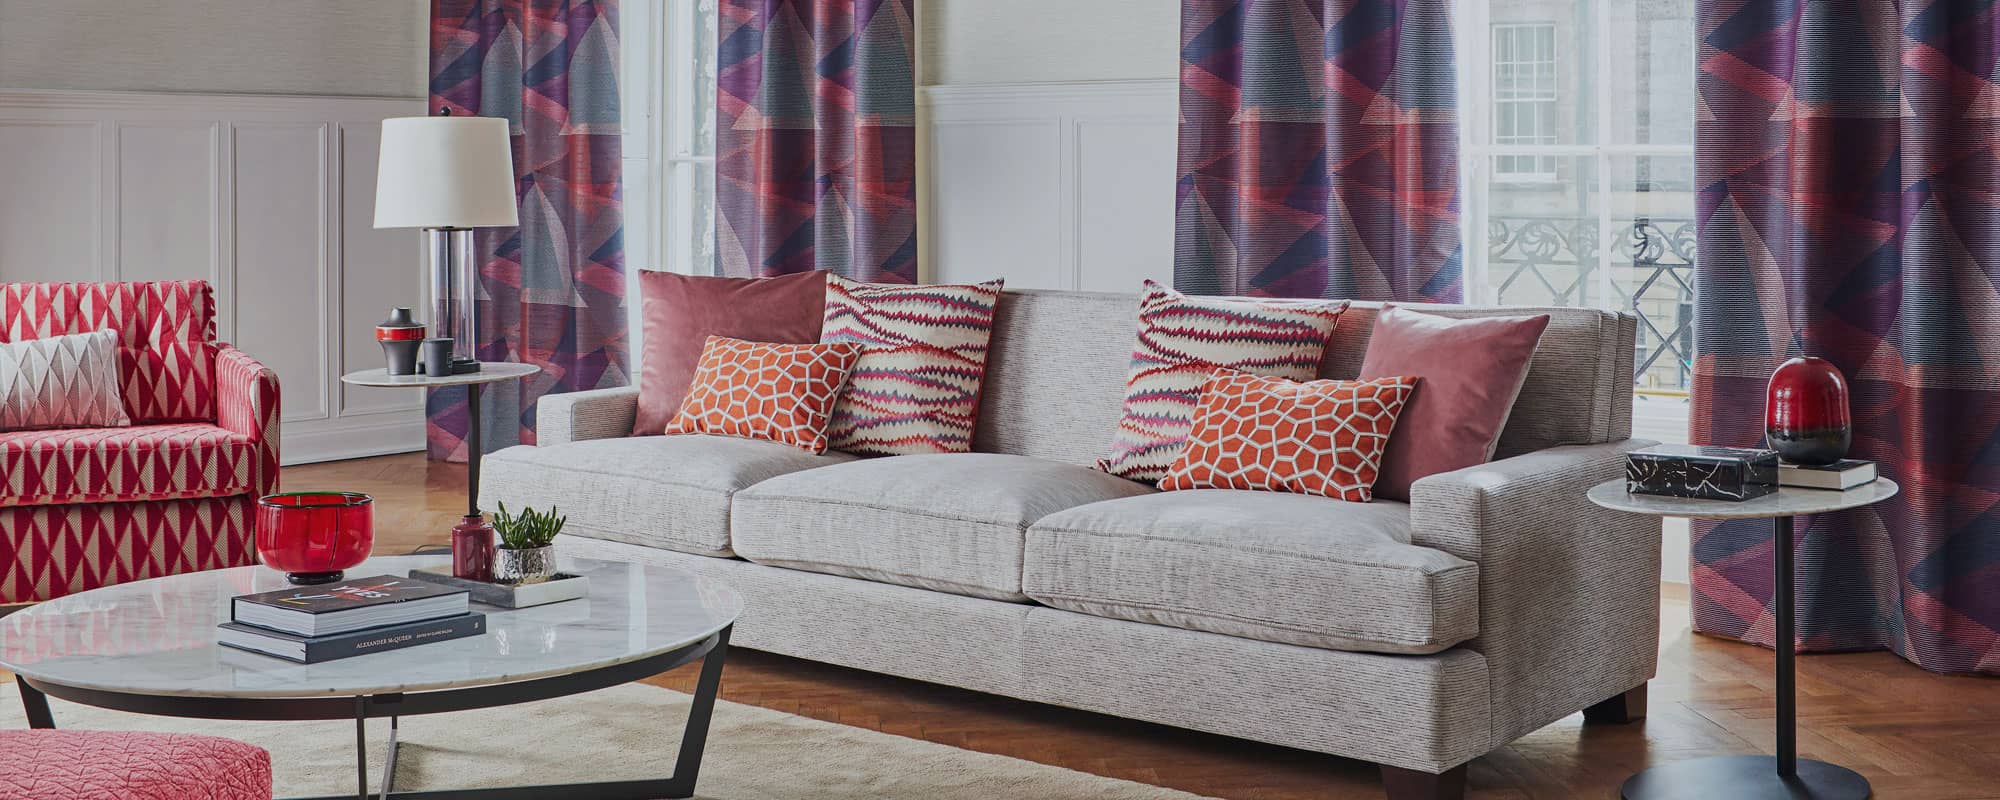 Re-upholstered sofa in Knutsford home